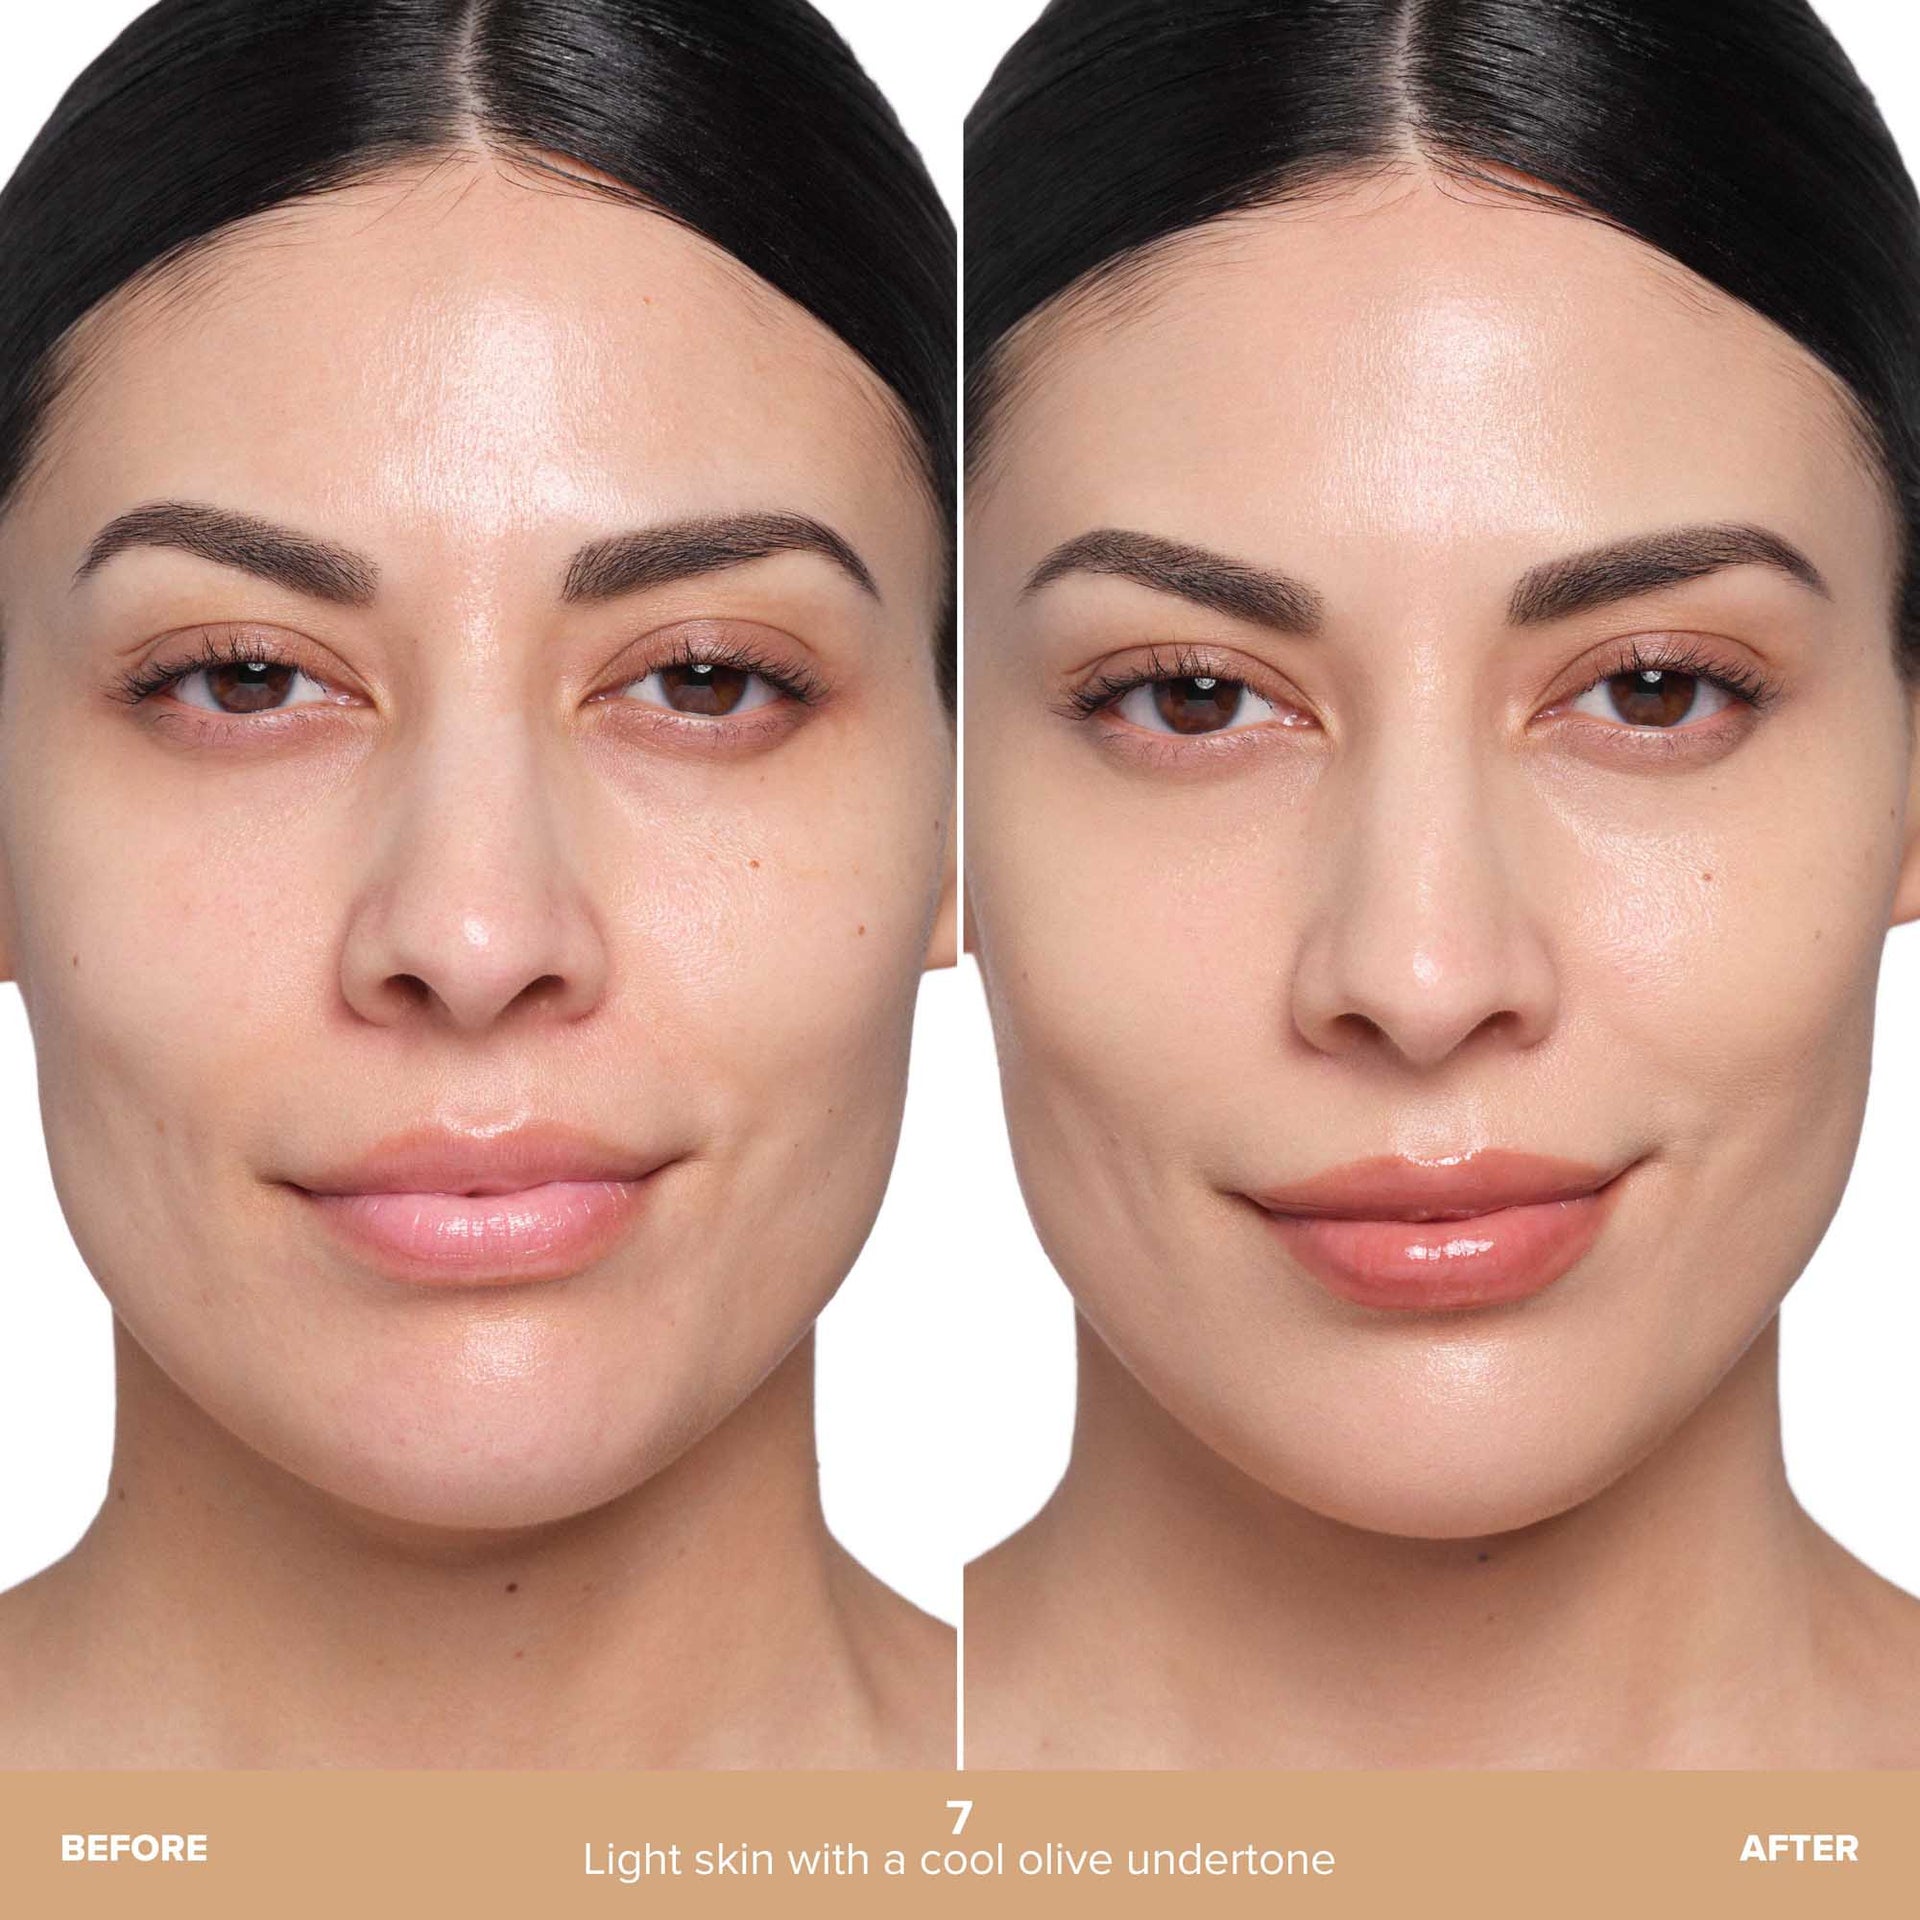 Shade 7 | Beauty Balm Serum Boosted Skin Tint Before & After - Shade 7